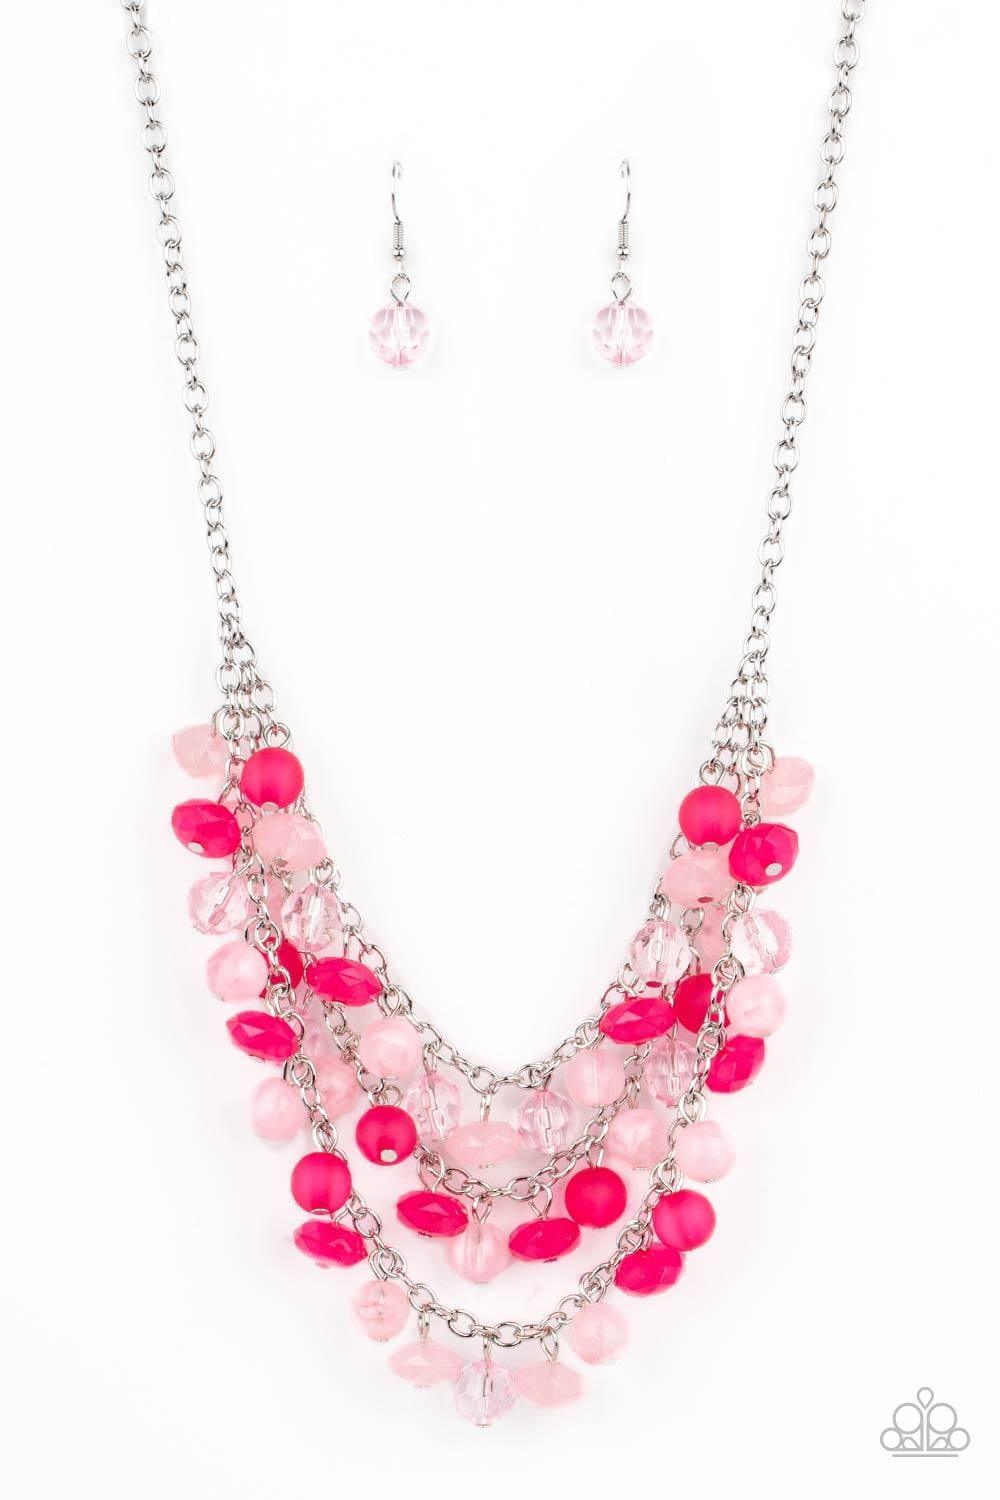 Paparazzi Accessories - Fairytale Timelessness - Pink Necklace - Bling by JessieK